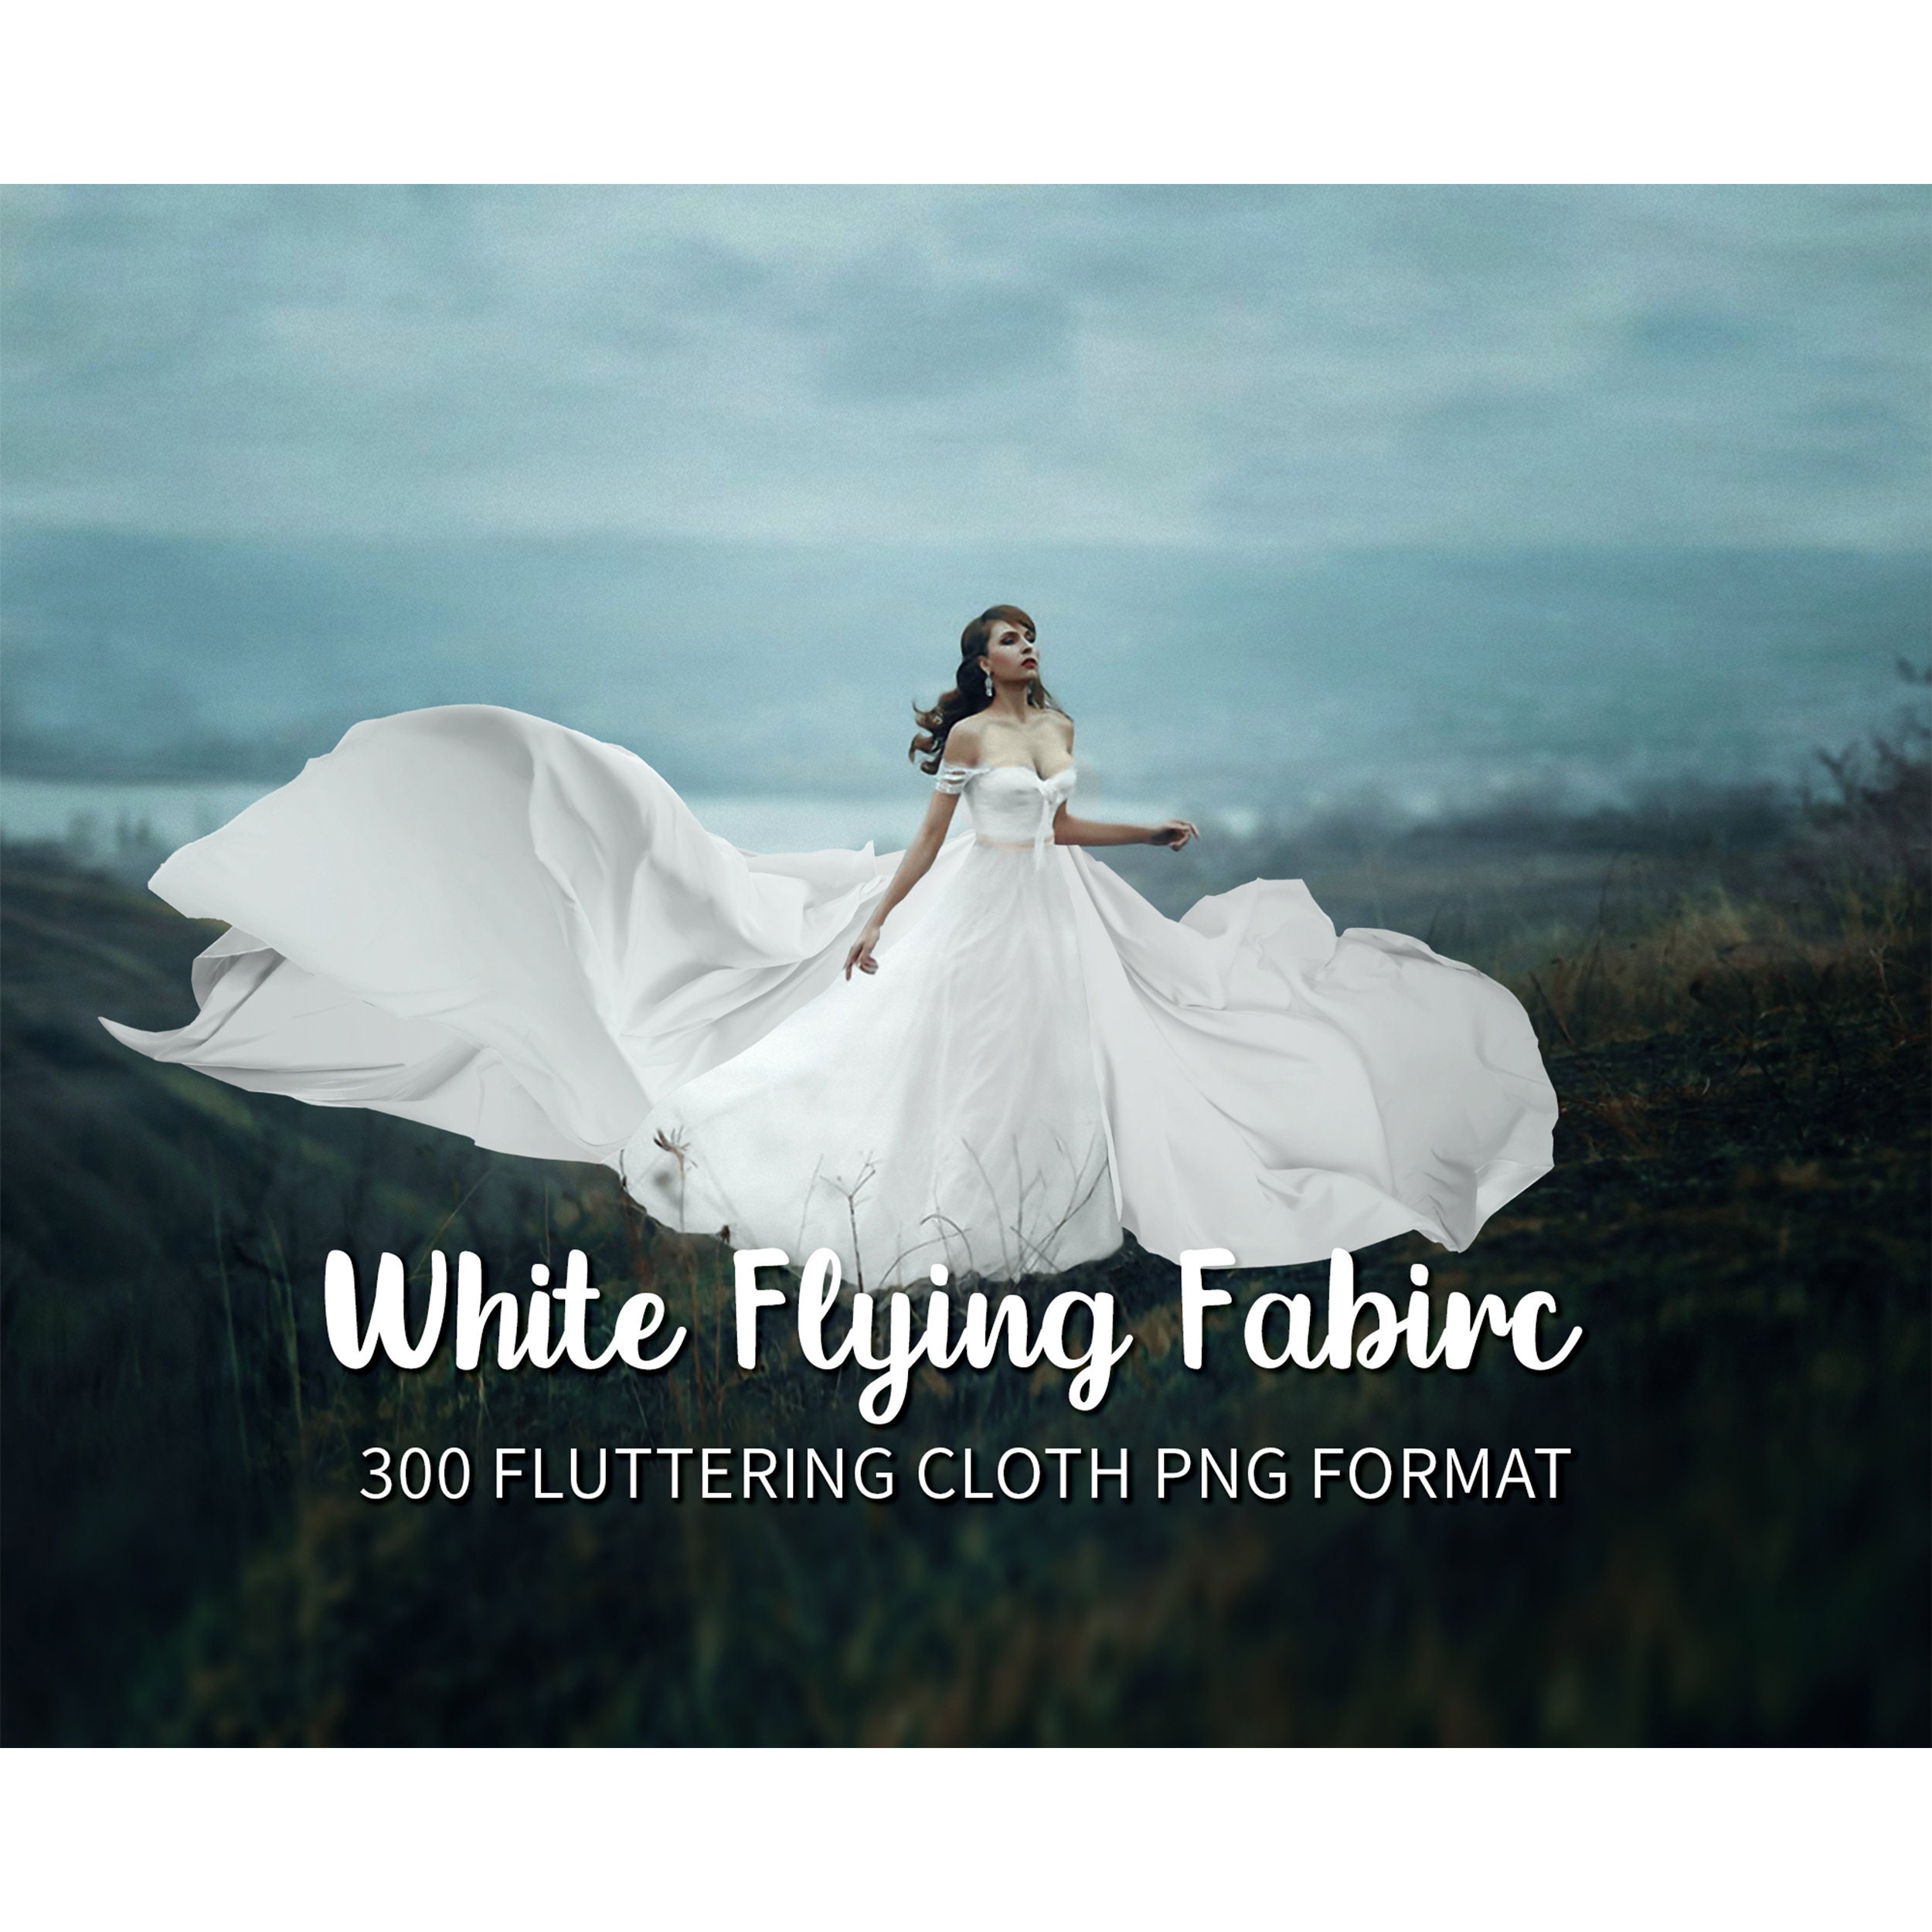 Fashion Model Dress Woman Flowing Fabric Gown Clothes Flow White Stock  Photo - Download Image Now - iStock